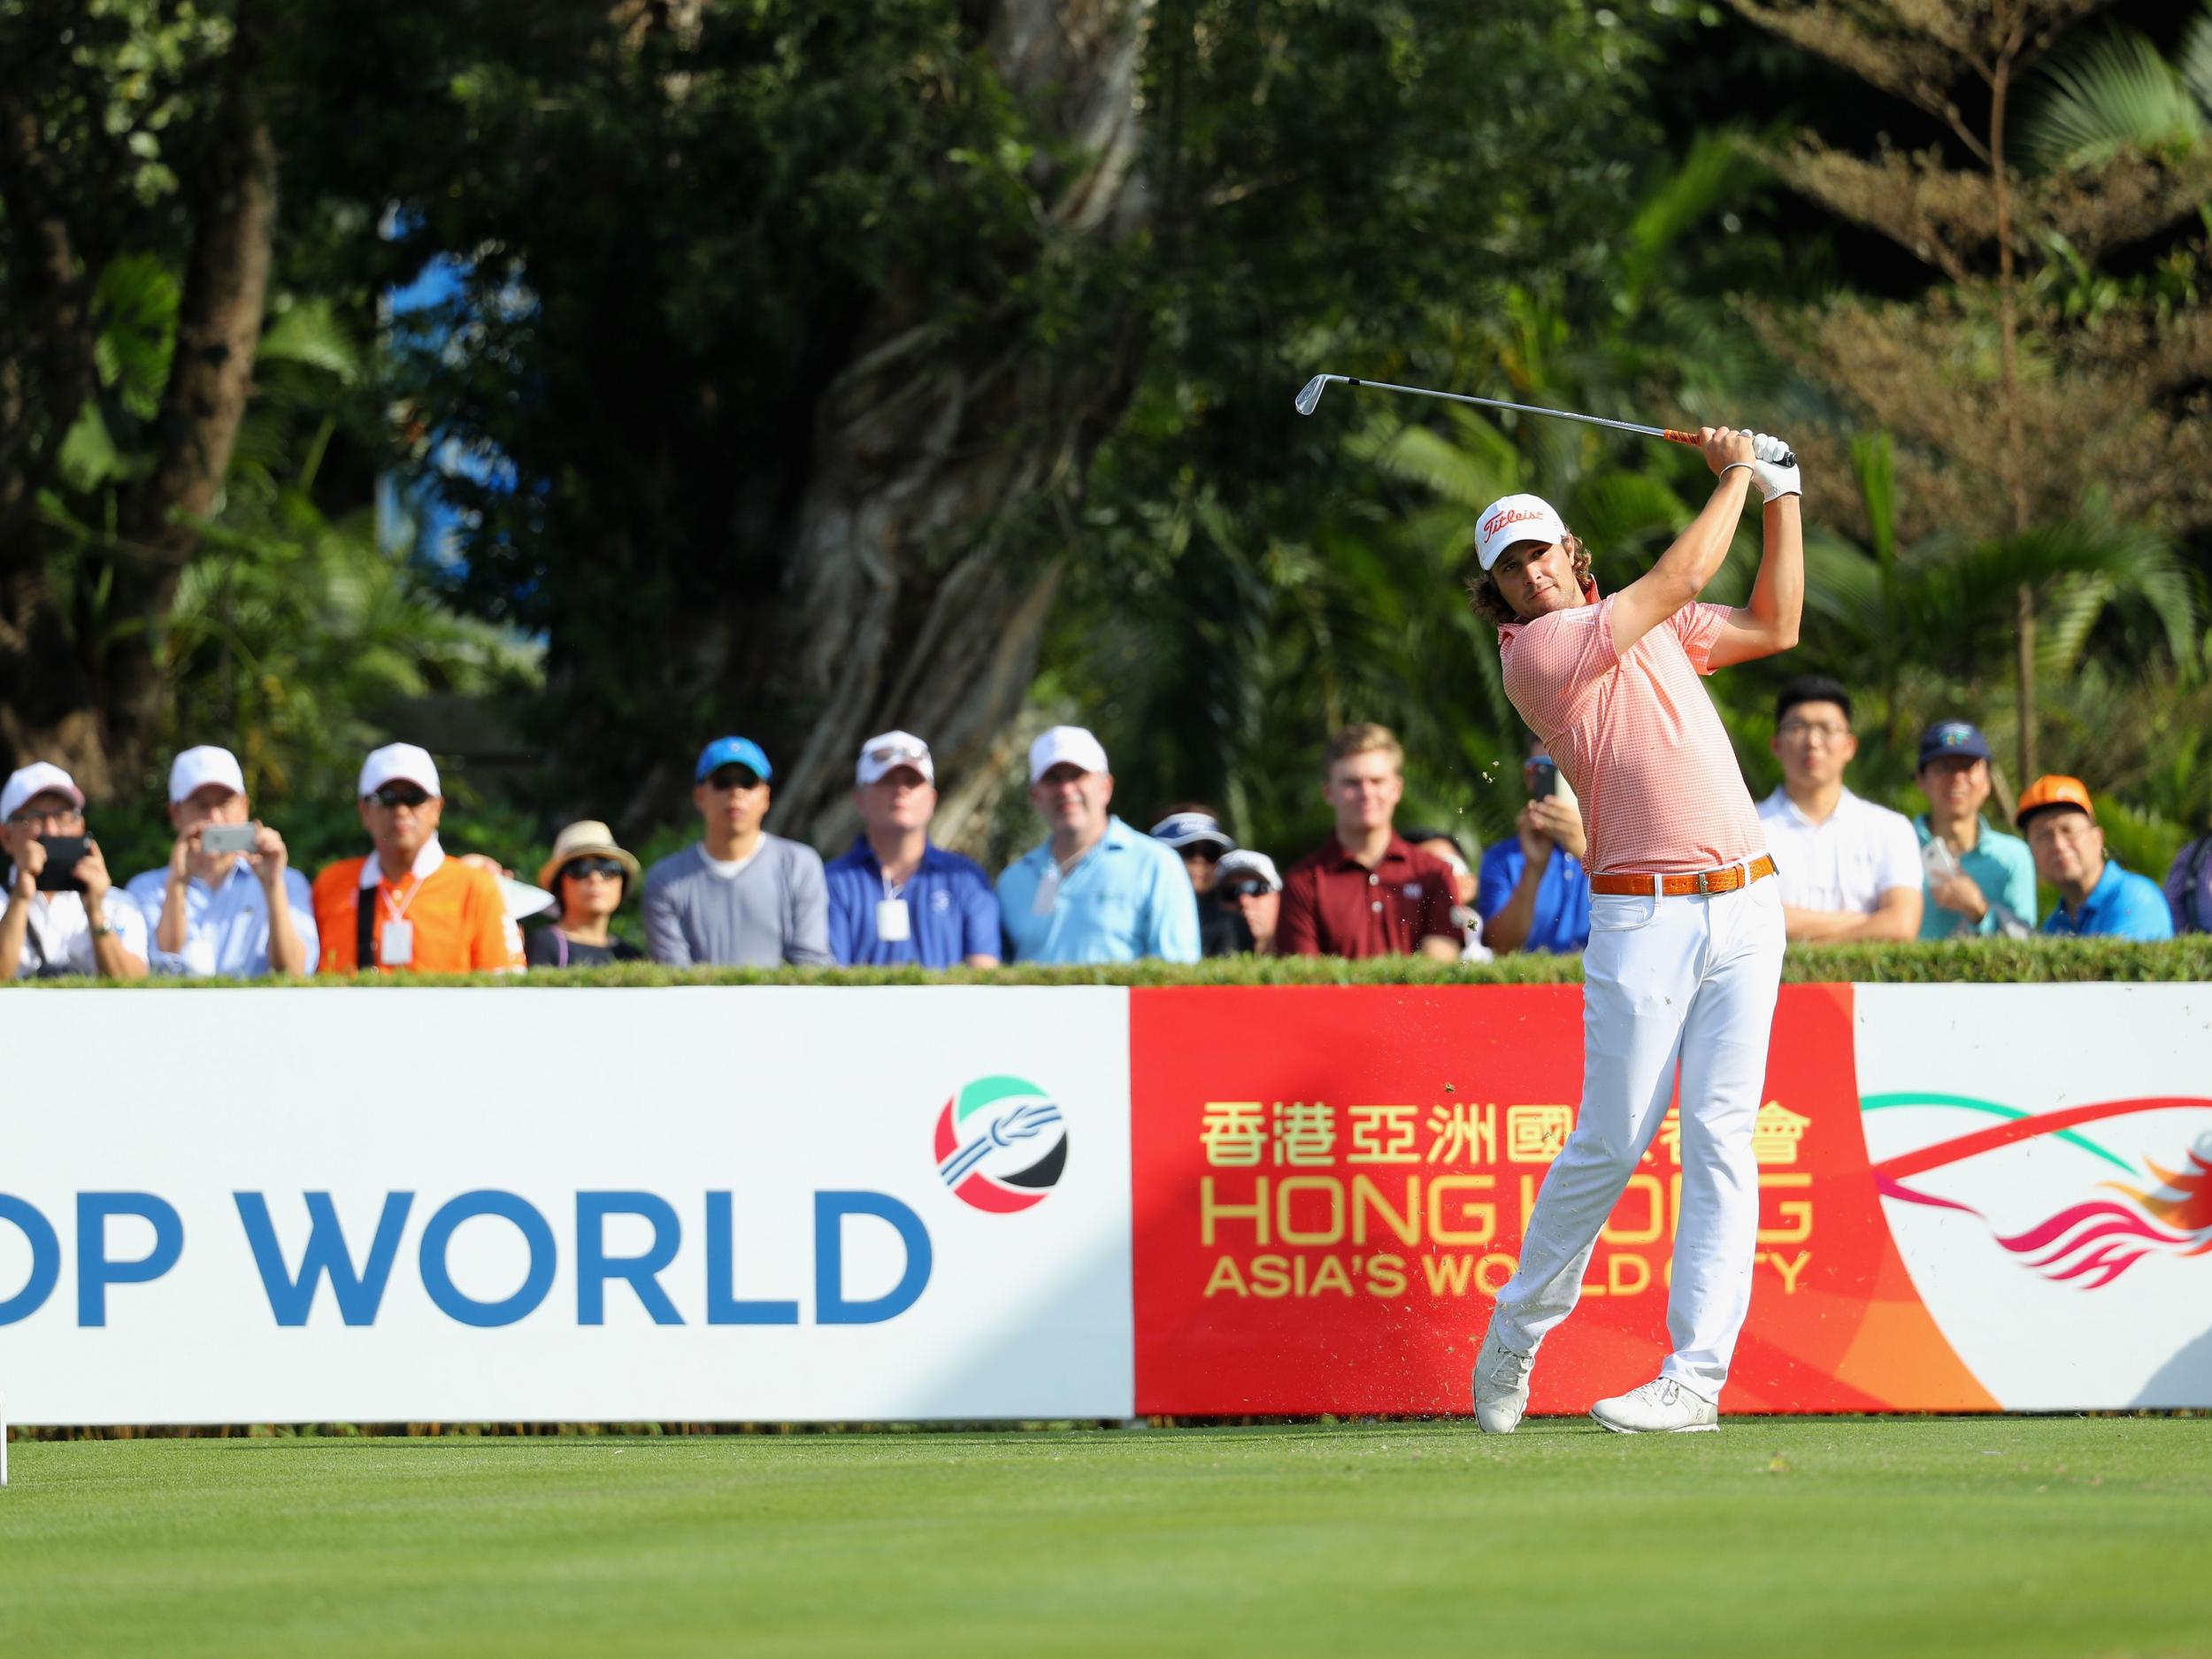 China is home to a number of PGA golf events